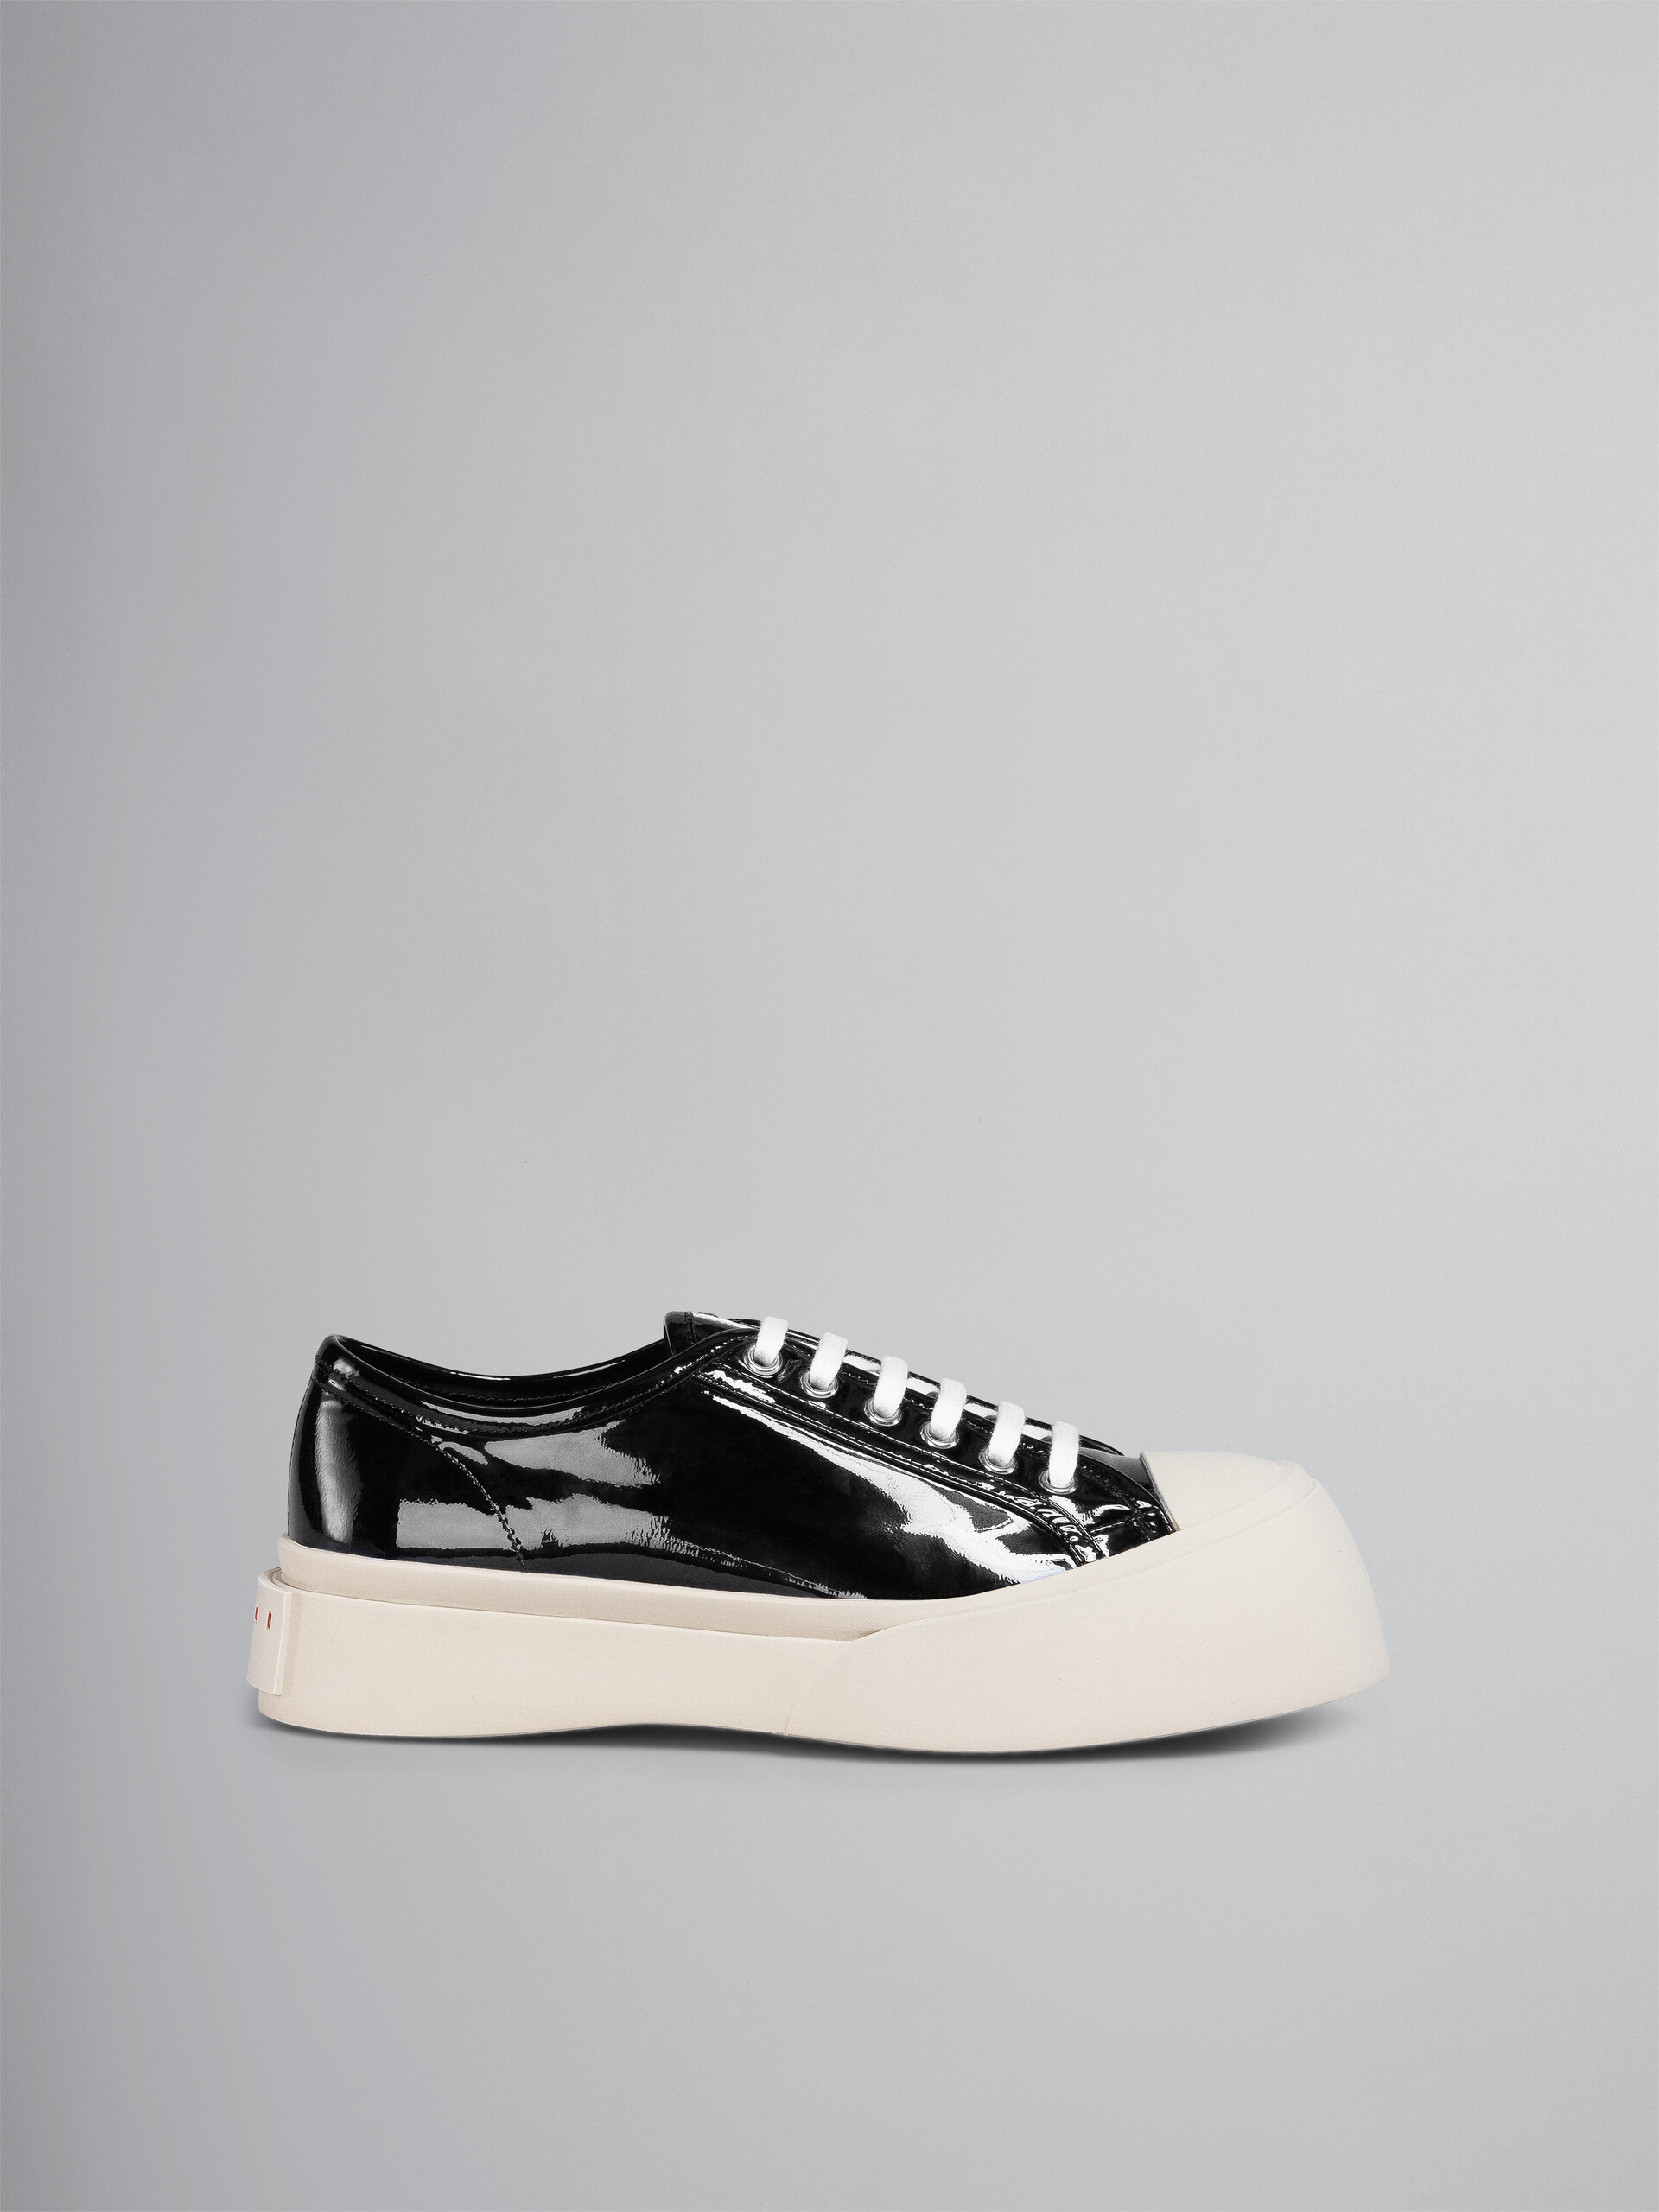 Black patent leather PABLO lace-up sneaker - Sneakers - Image 1